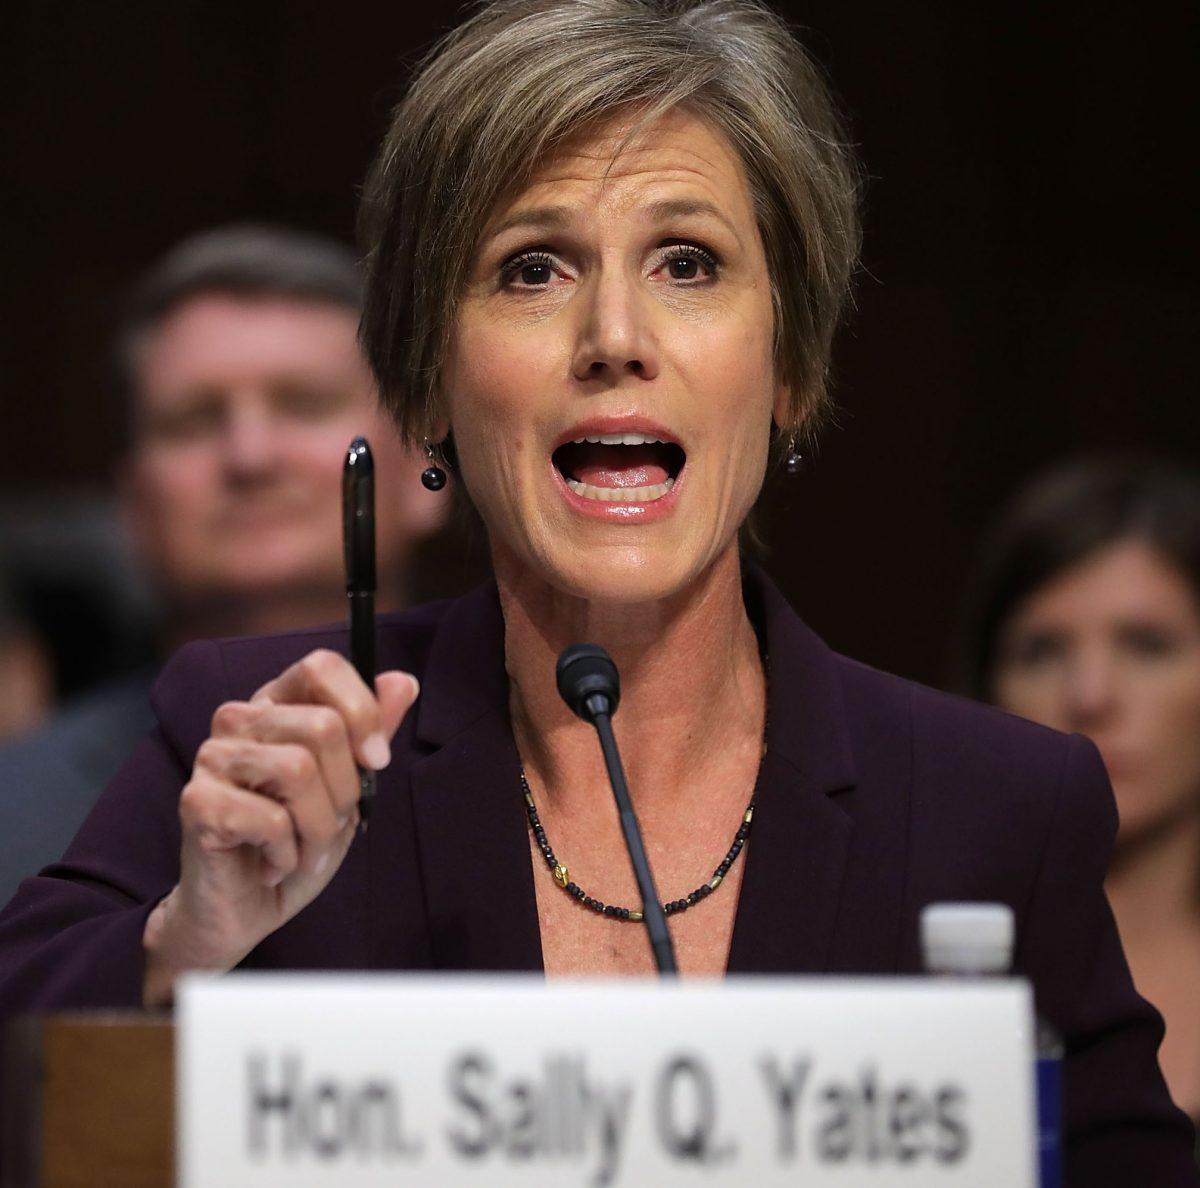 Deputy Attorney General Sally Yates speaks to lawmakers in a file photograph. (Chip Somodevilla/Getty Images)